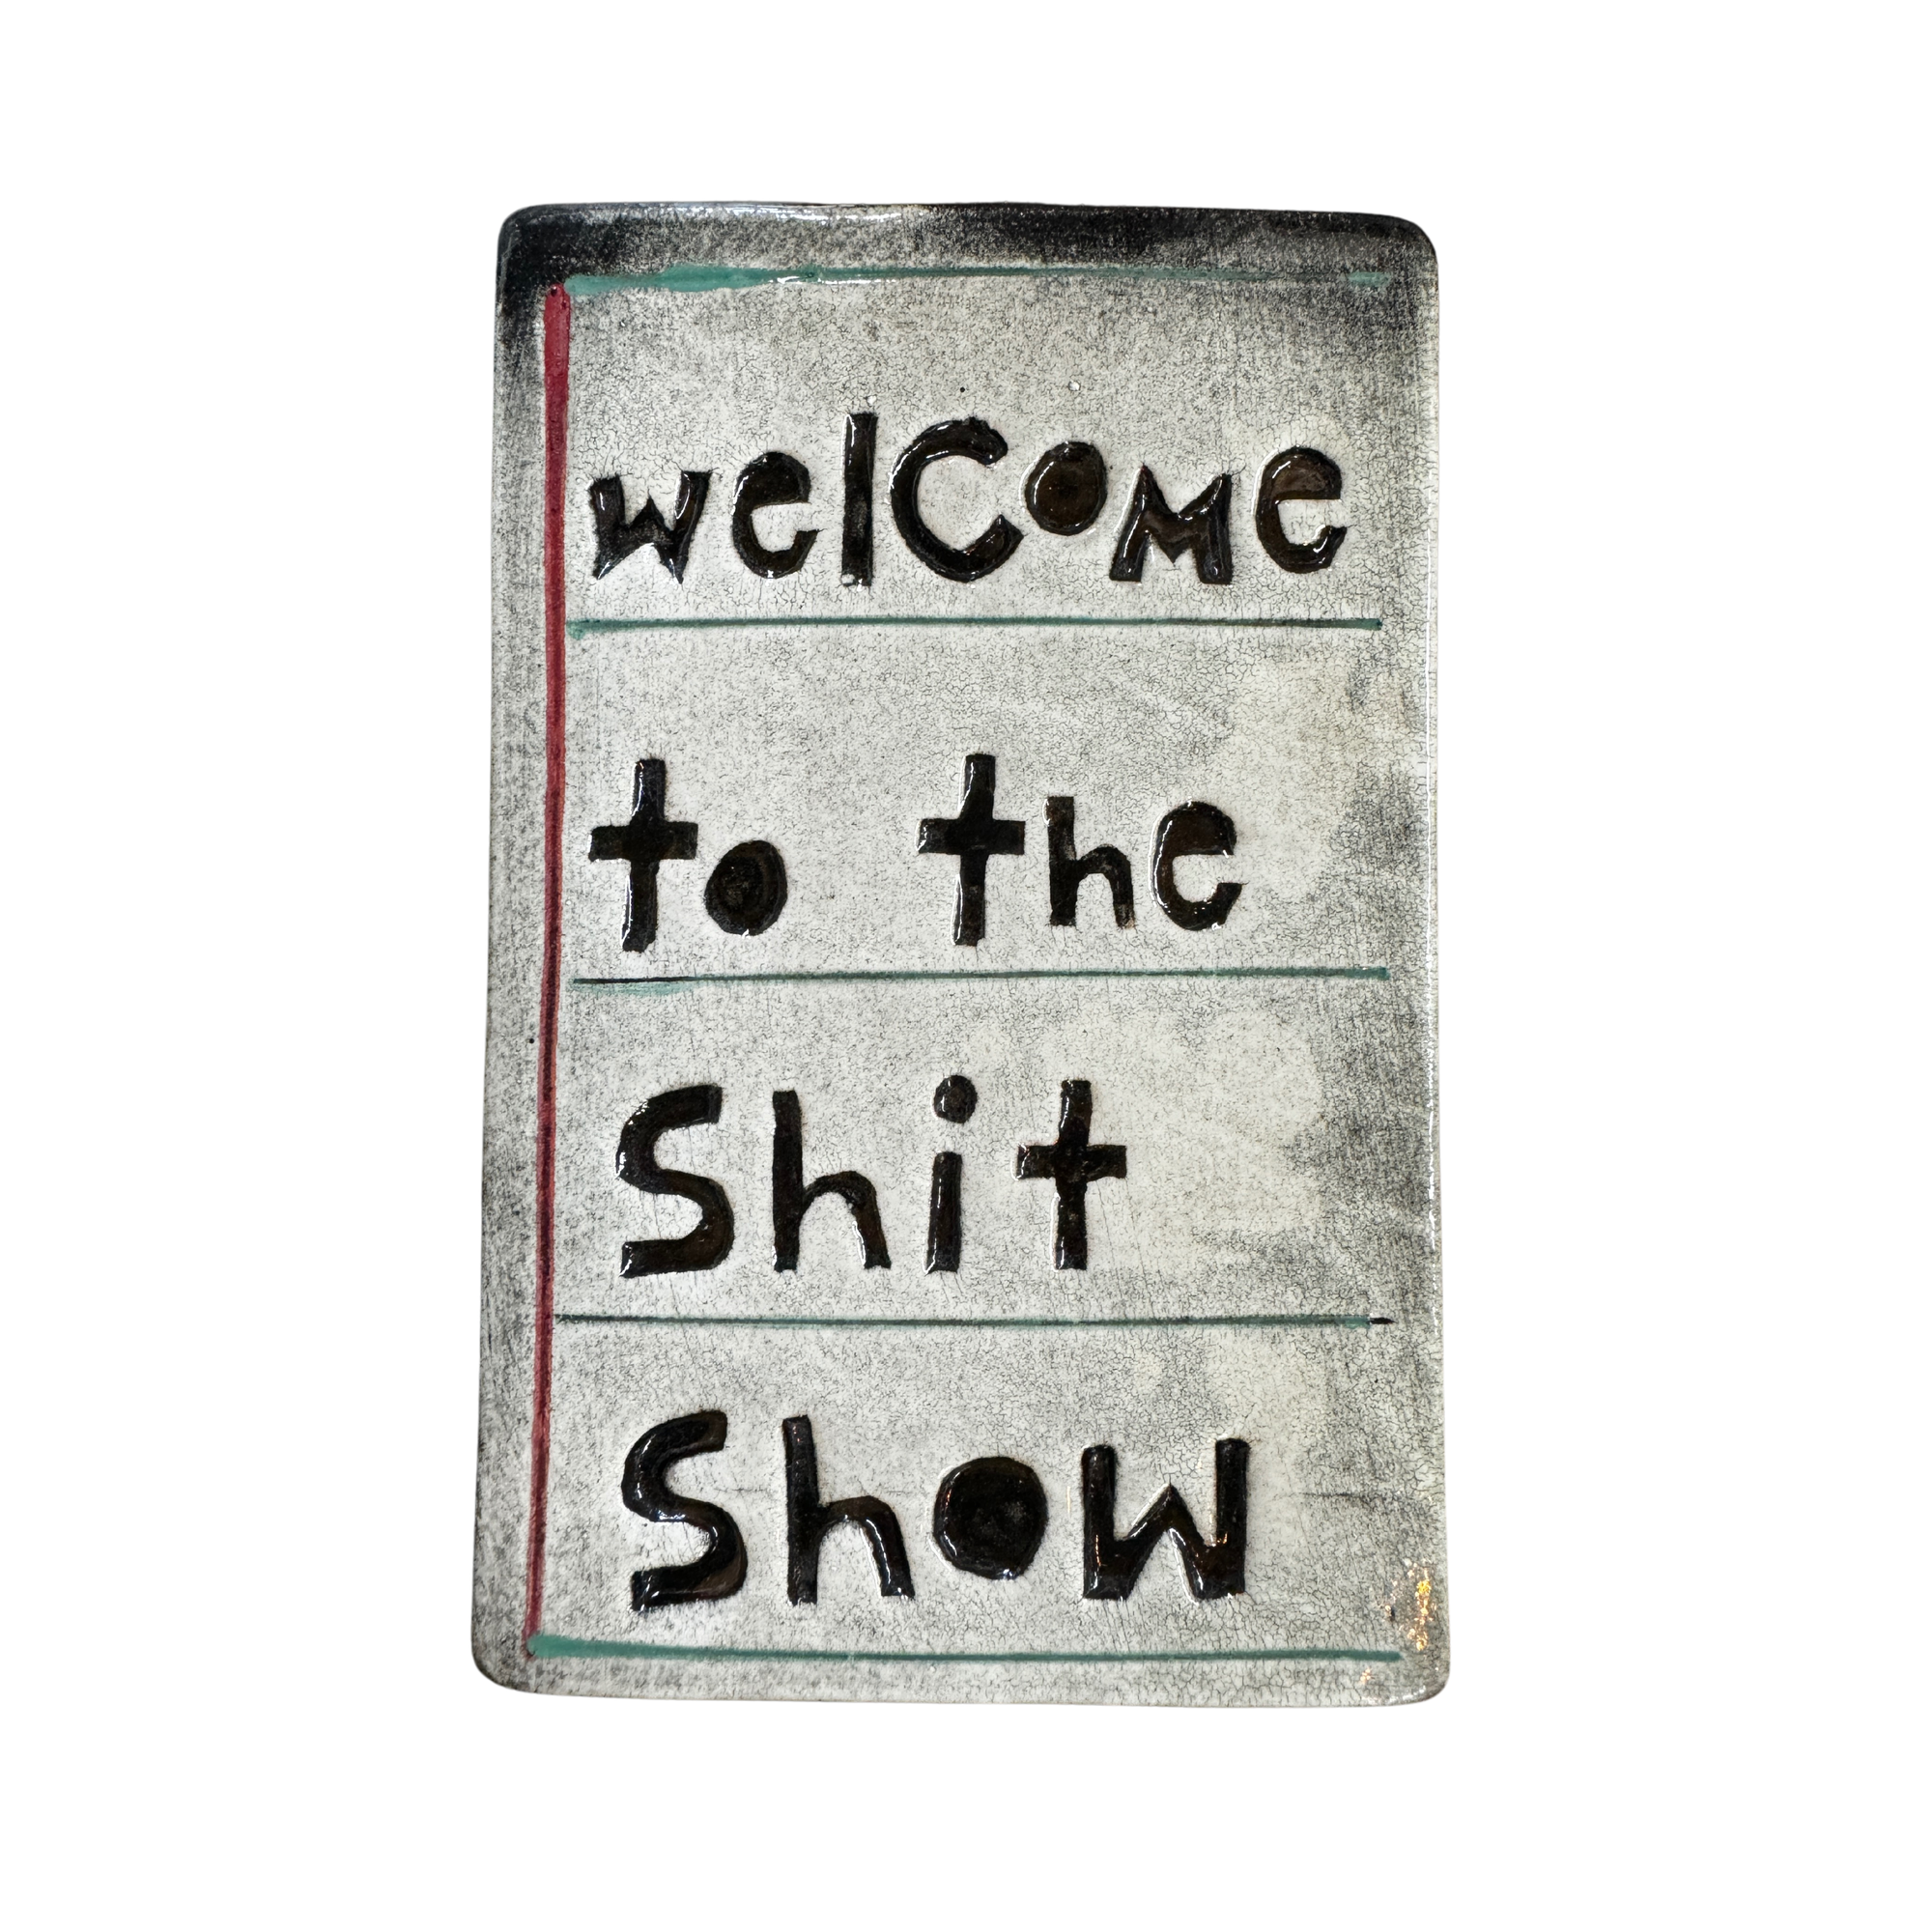 Welcome to the shit show tile